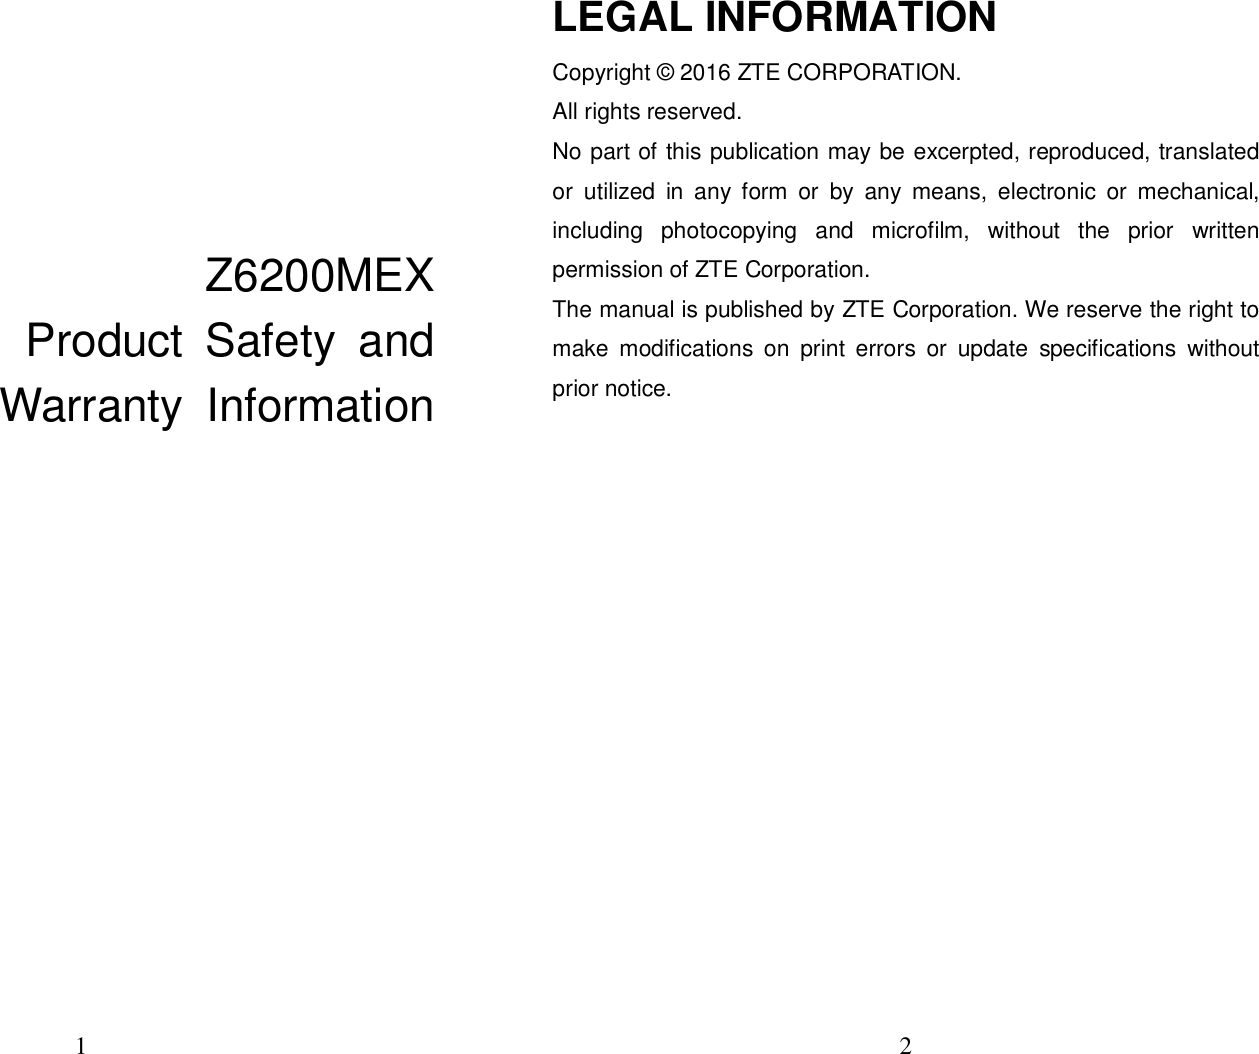 1                                                   Z6200MEX                           Product  Safety  and  Warranty  Information          2  LEGAL INFORMATION Copyright © 2016 ZTE CORPORATION. All rights reserved.   No part of this publication may be excerpted, reproduced, translated or  utilized  in  any  form  or  by  any  means,  electronic  or  mechanical, including  photocopying  and  microfilm,  without  the  prior  written permission of ZTE Corporation. The manual is published by ZTE Corporation. We reserve the right to make  modifications  on  print  errors  or  update  specifications  without prior notice.          